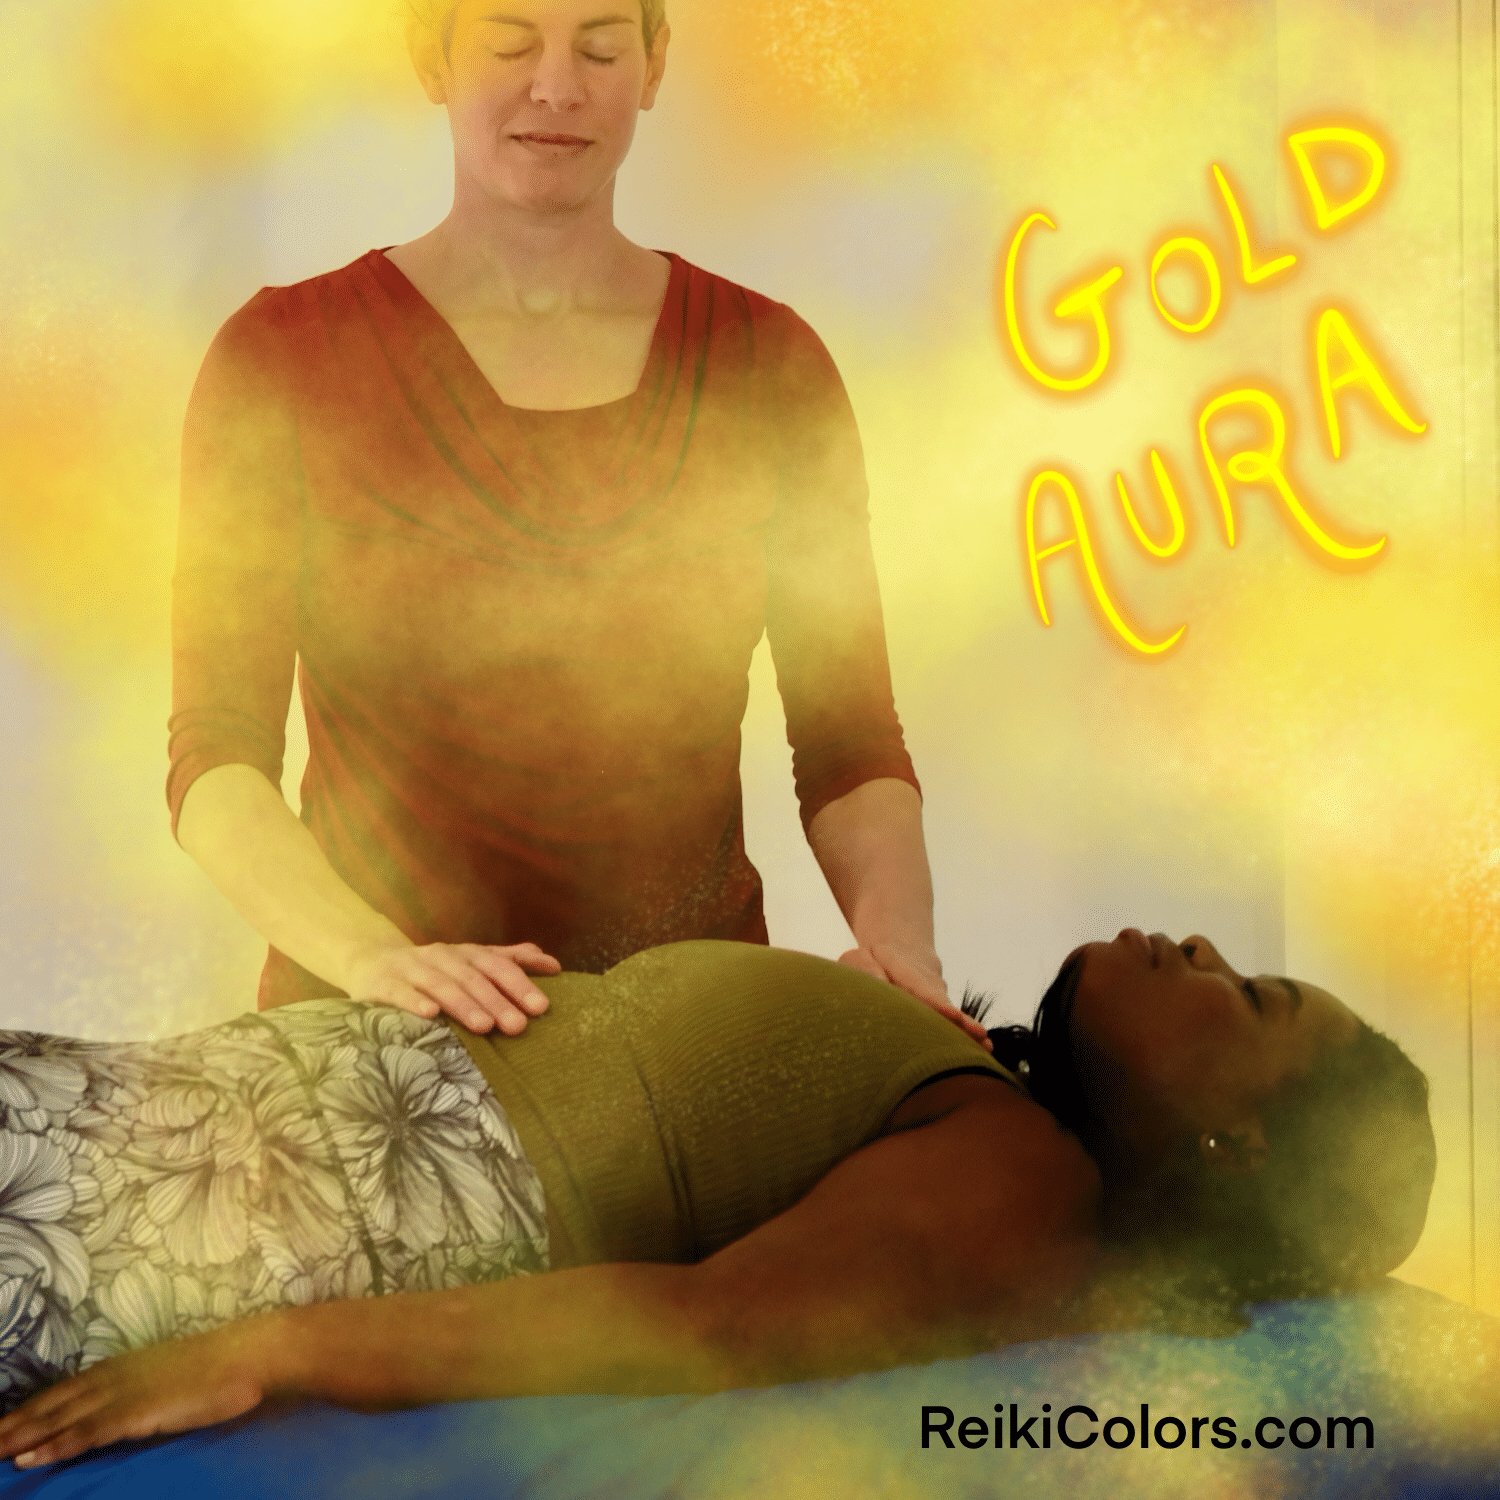 Gold aura meaning